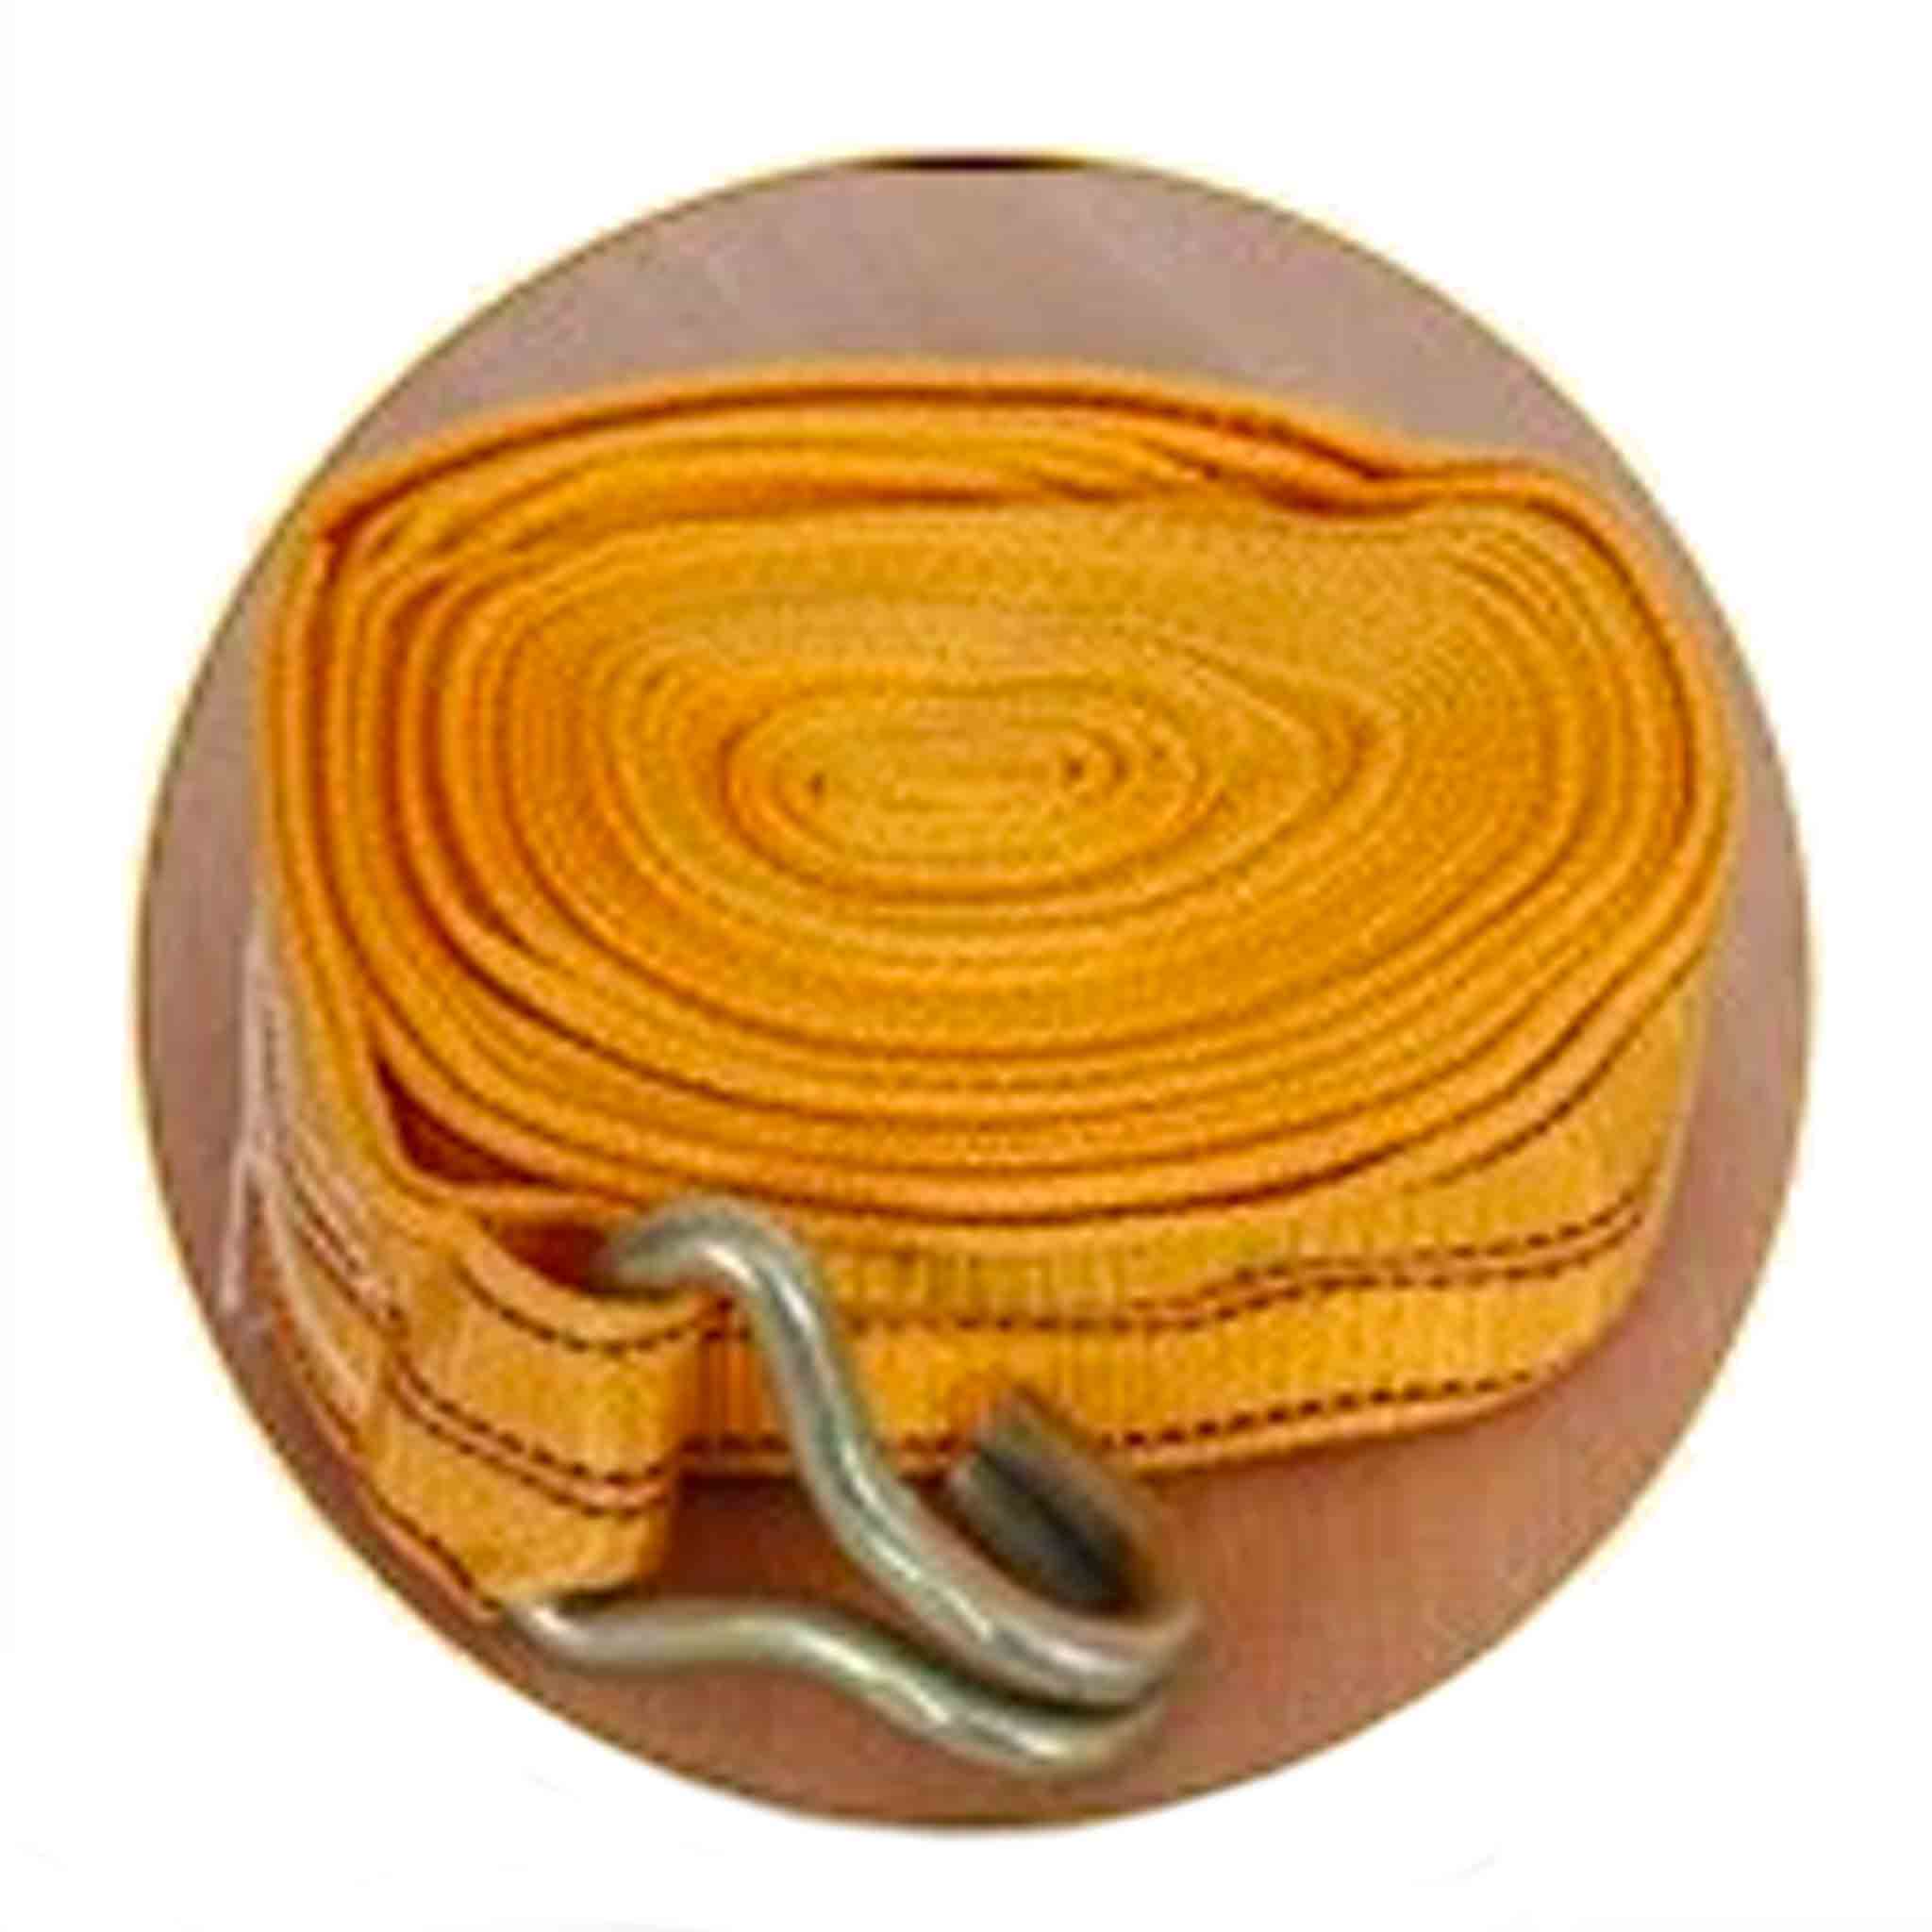 Heavy Duty Wide Girth Strap for Heavy Loads - 10 Meters Length - Accessories collection by Buzzbee Beekeeping Supplies